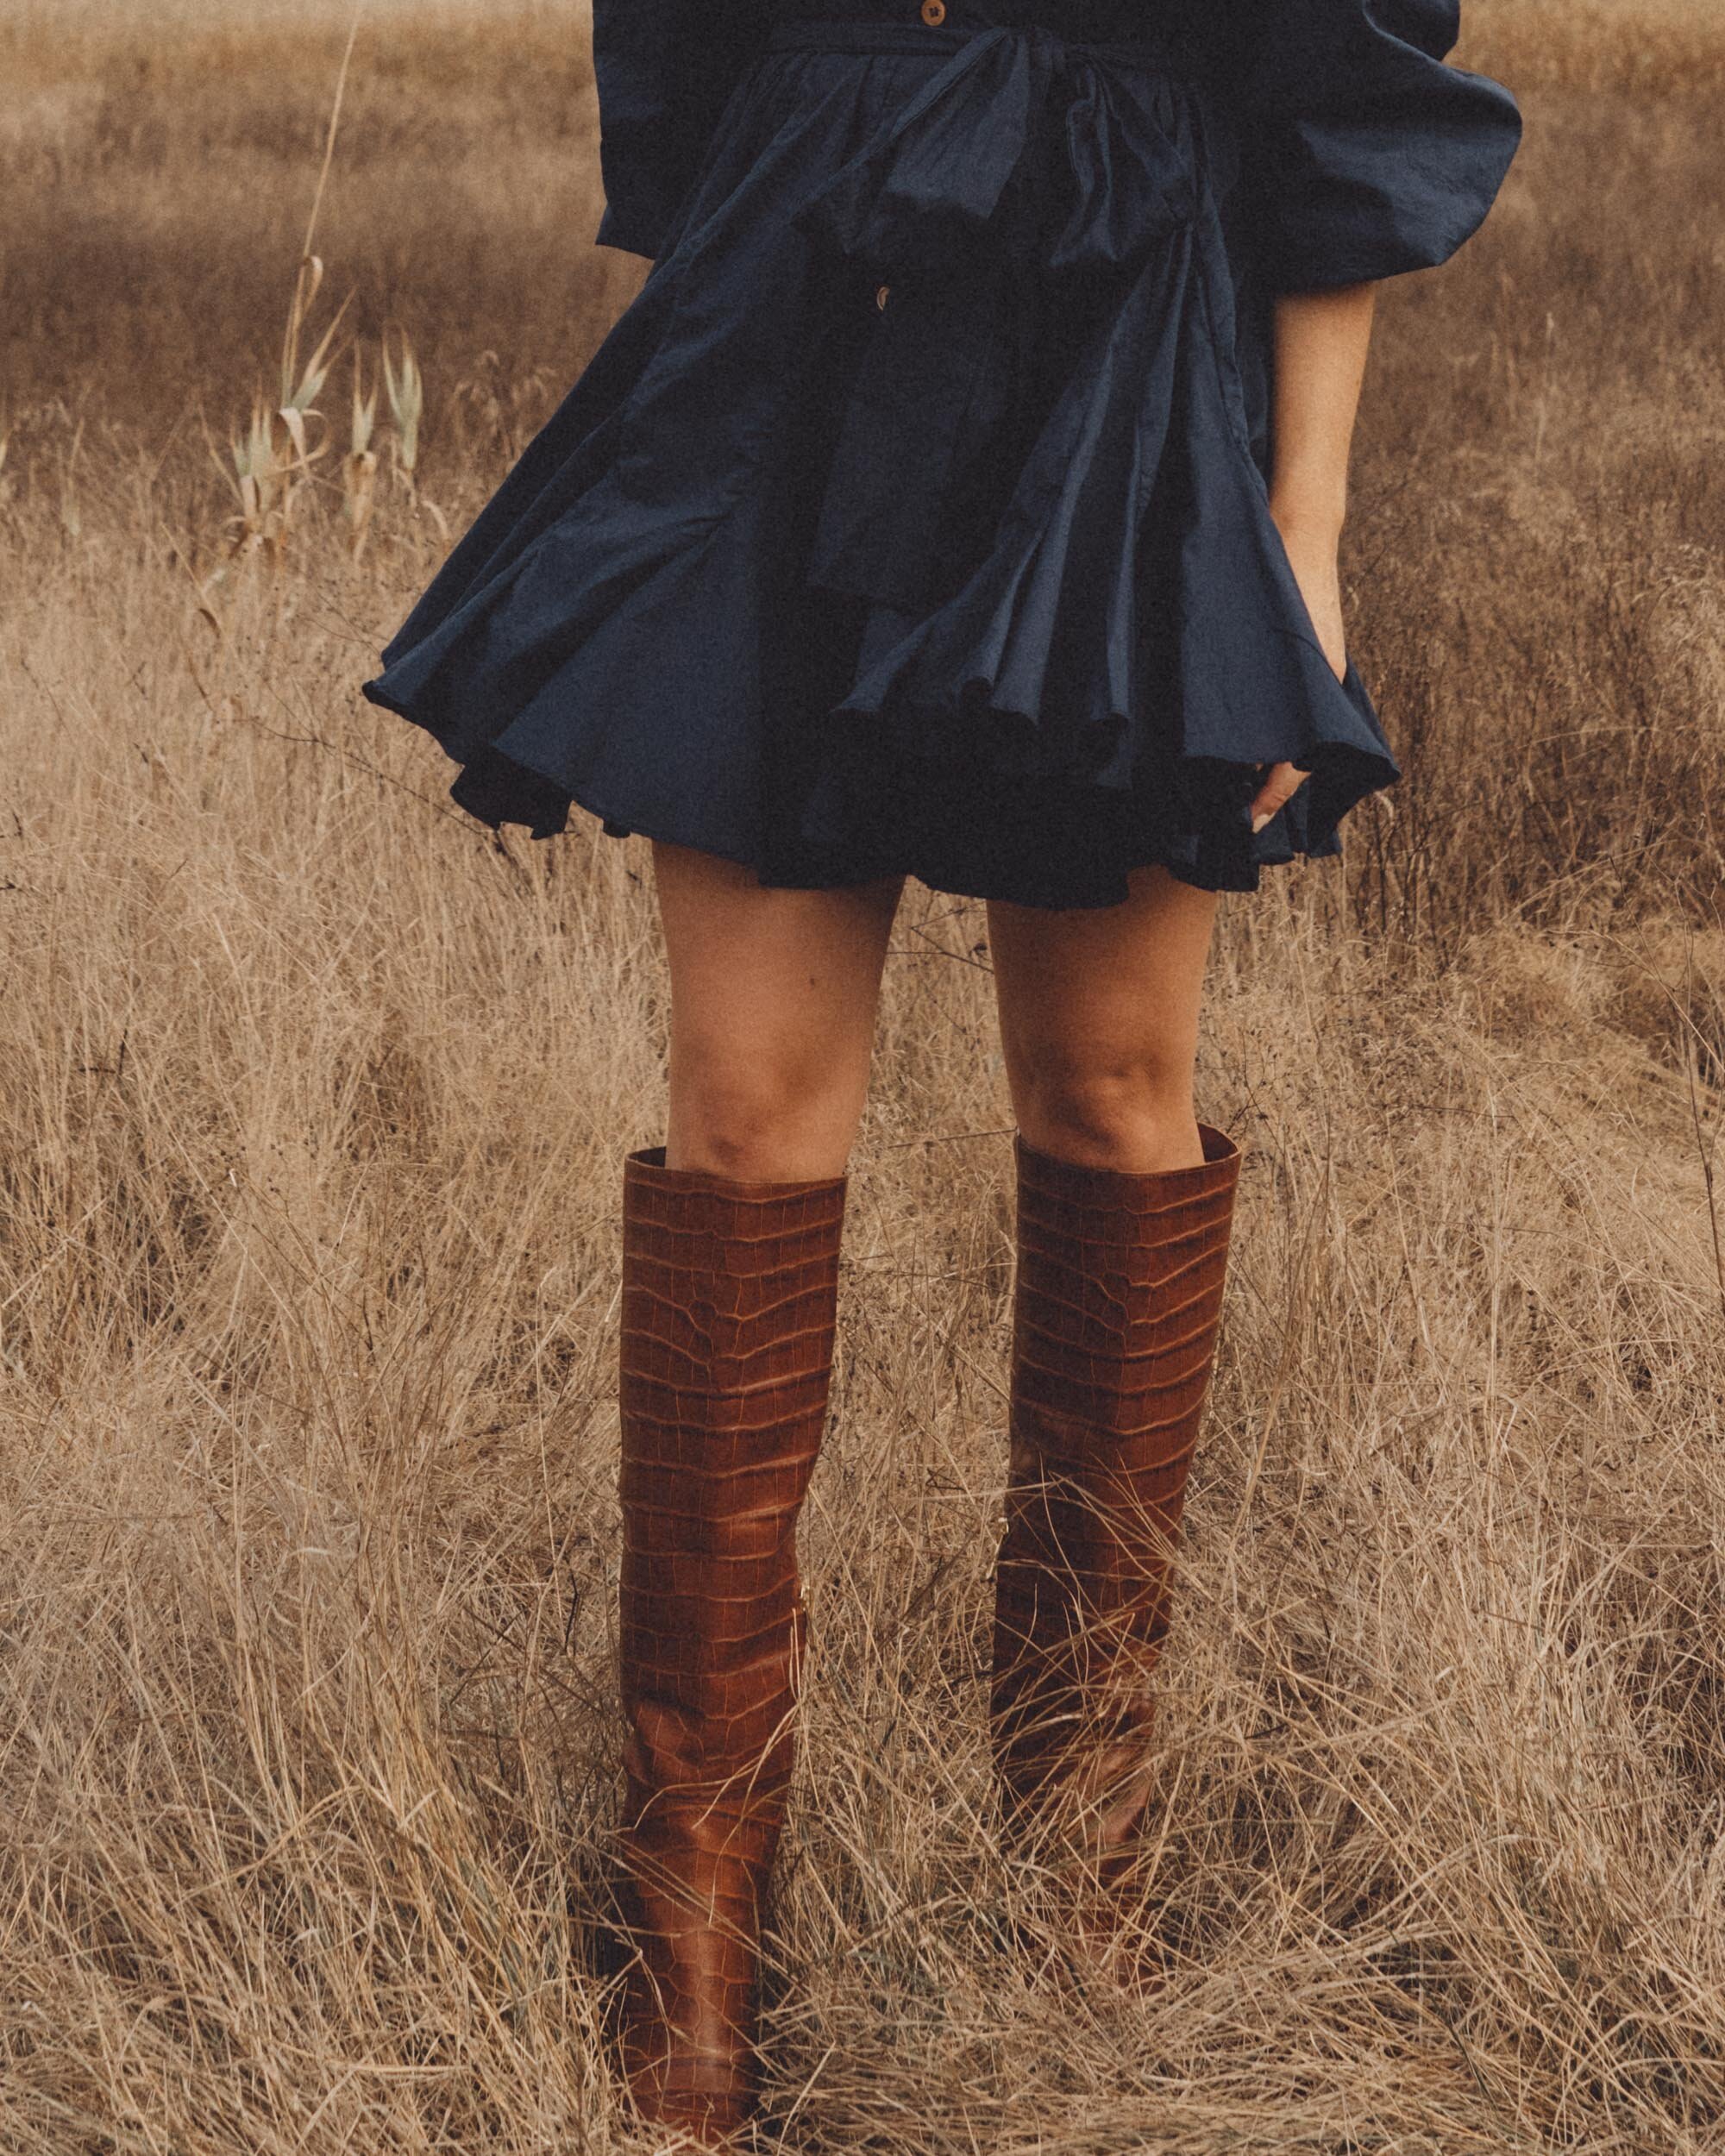 Chic Fall Dress Outfit. Sarah Butler of @sarahchristine wearing Rhode Emma Tie-Waist Flared Navy Dress and Brown Croc Knee High Boot in Seattle, Washington --7.jpg